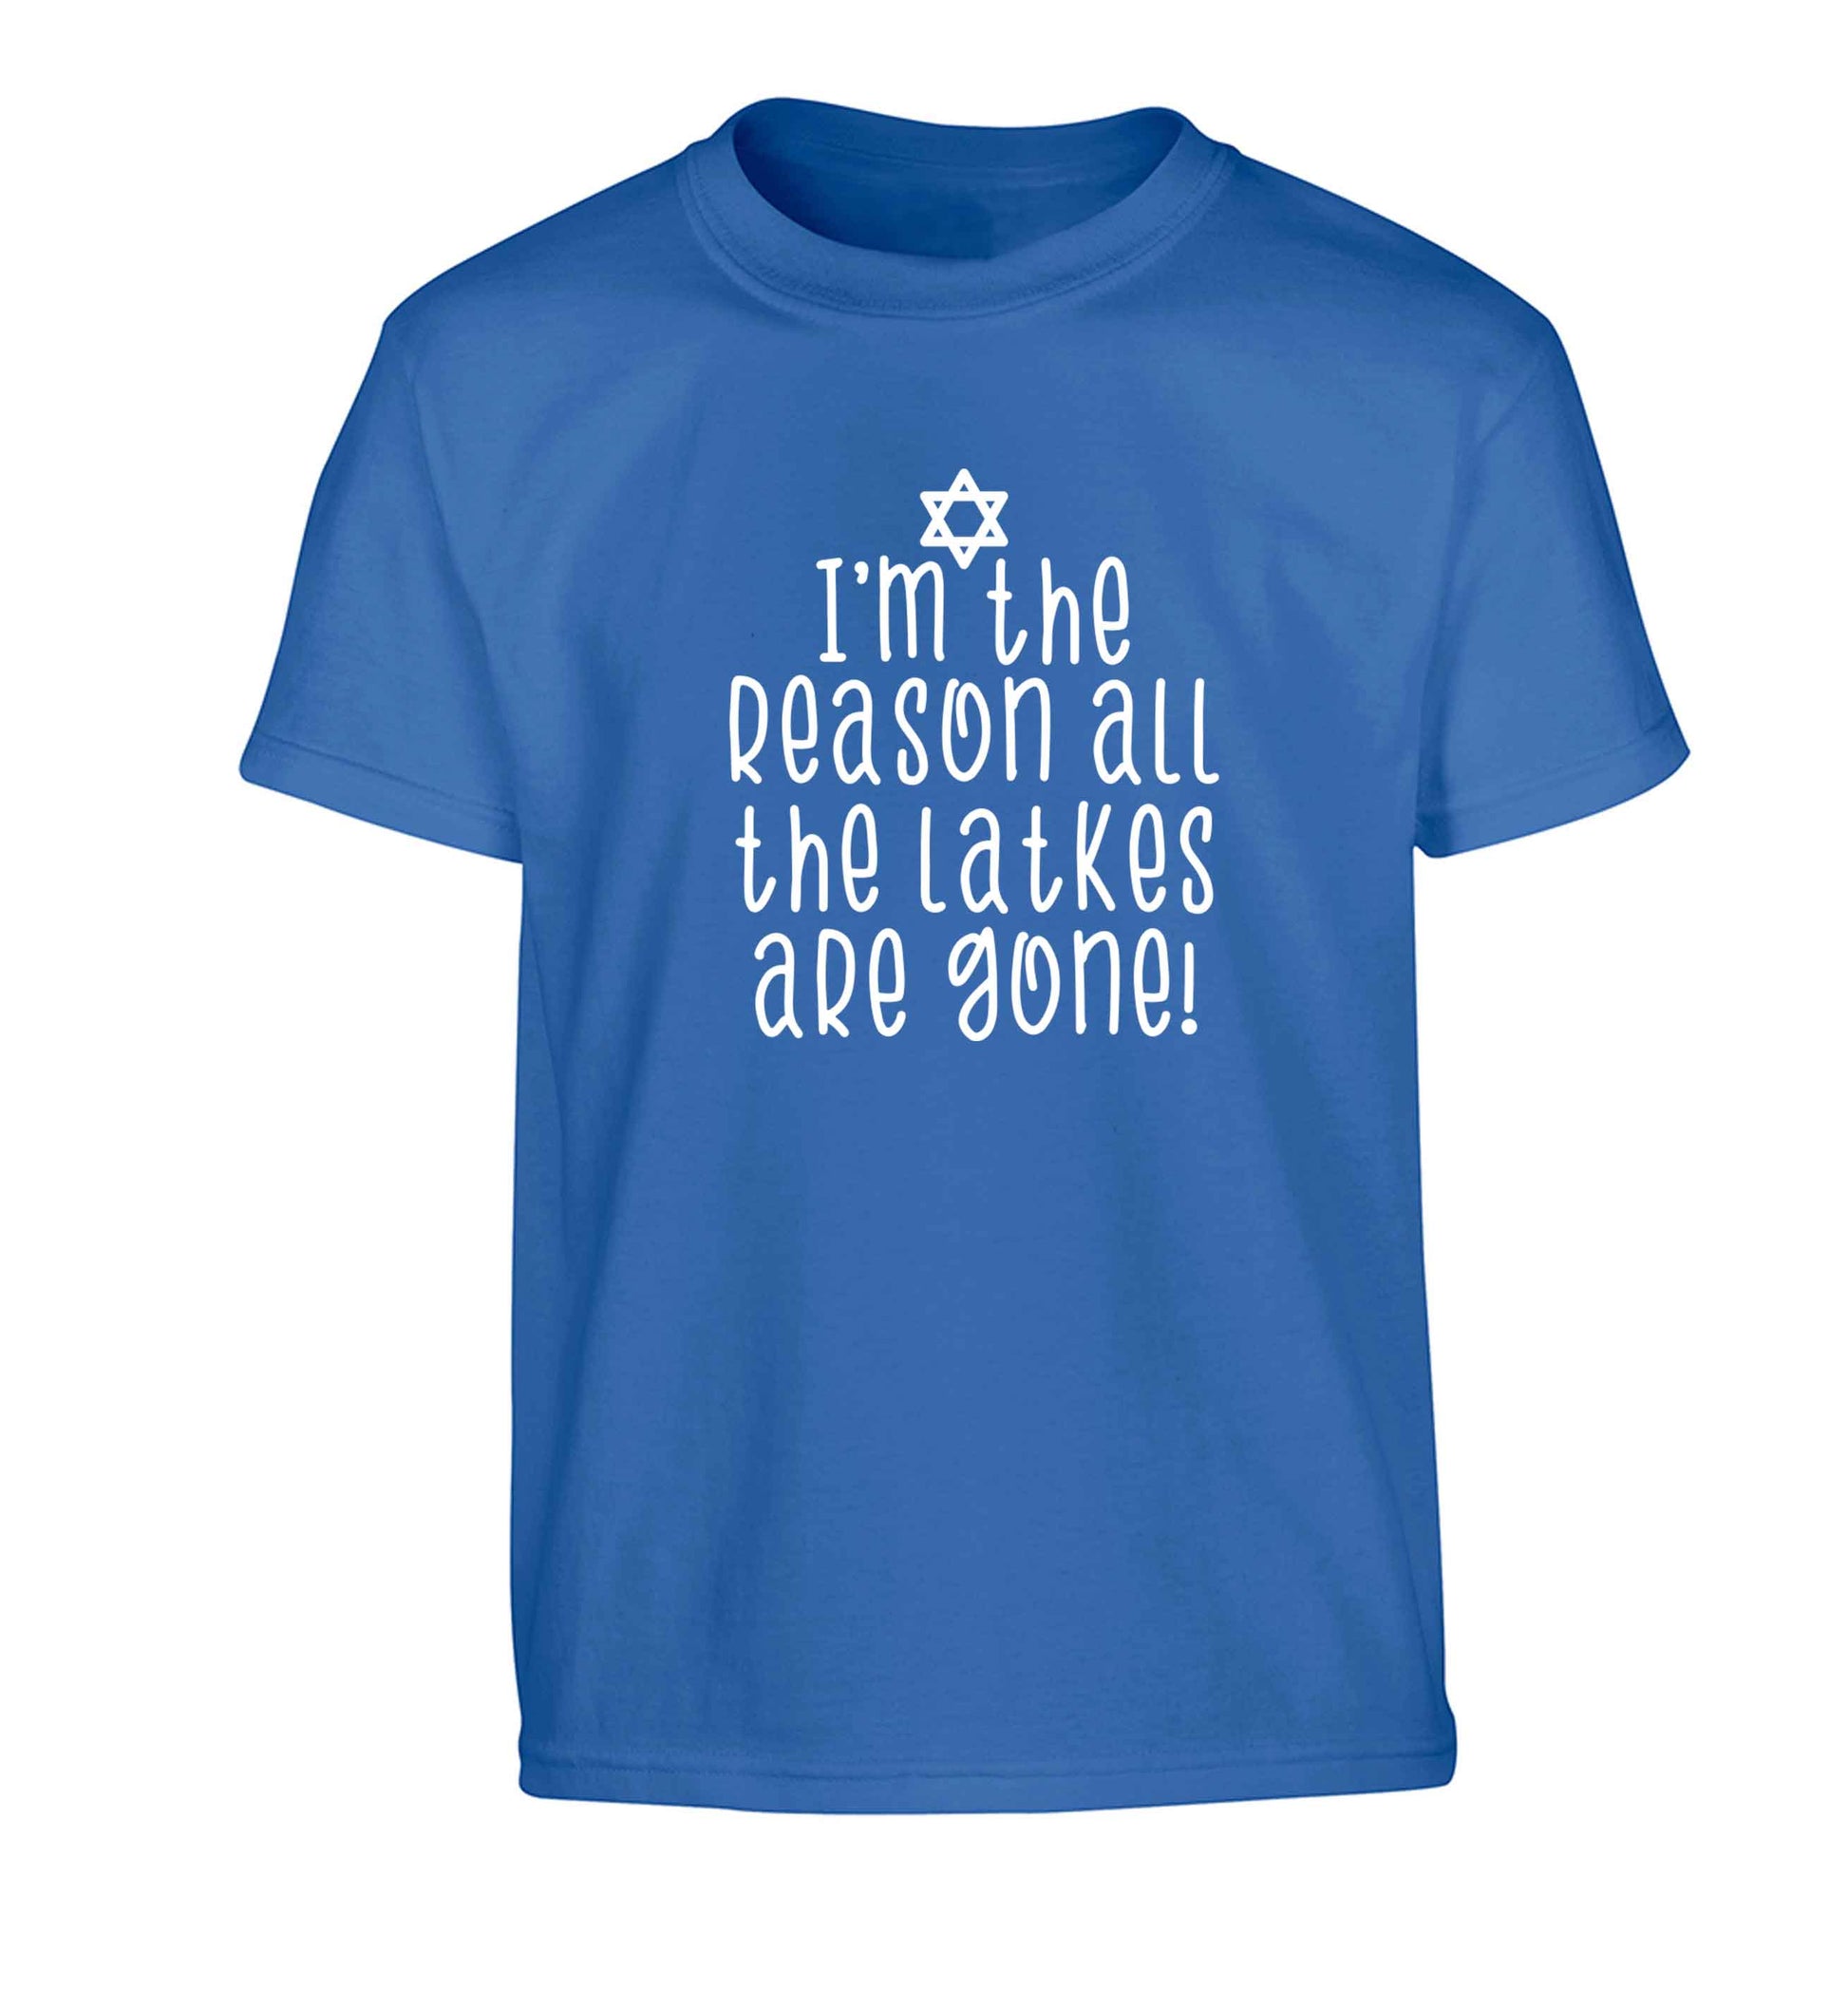 I'm the reason all the latkes are gone Children's blue Tshirt 12-13 Years